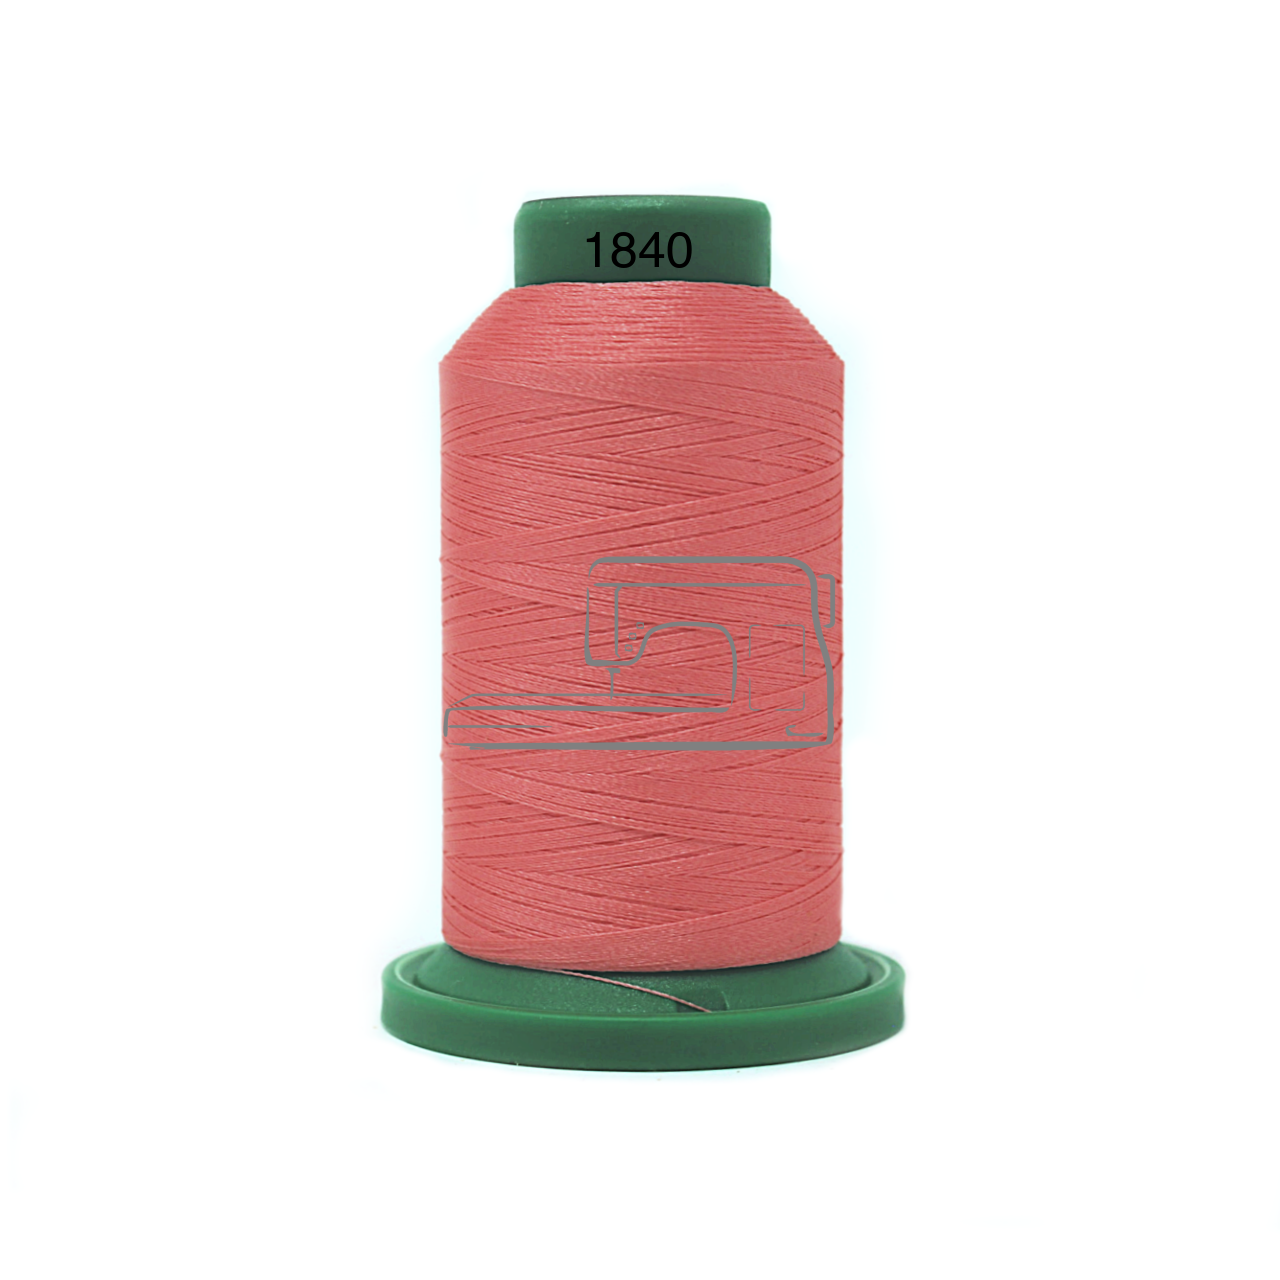 Isacord Isacord sewing and embroidery thread 1840